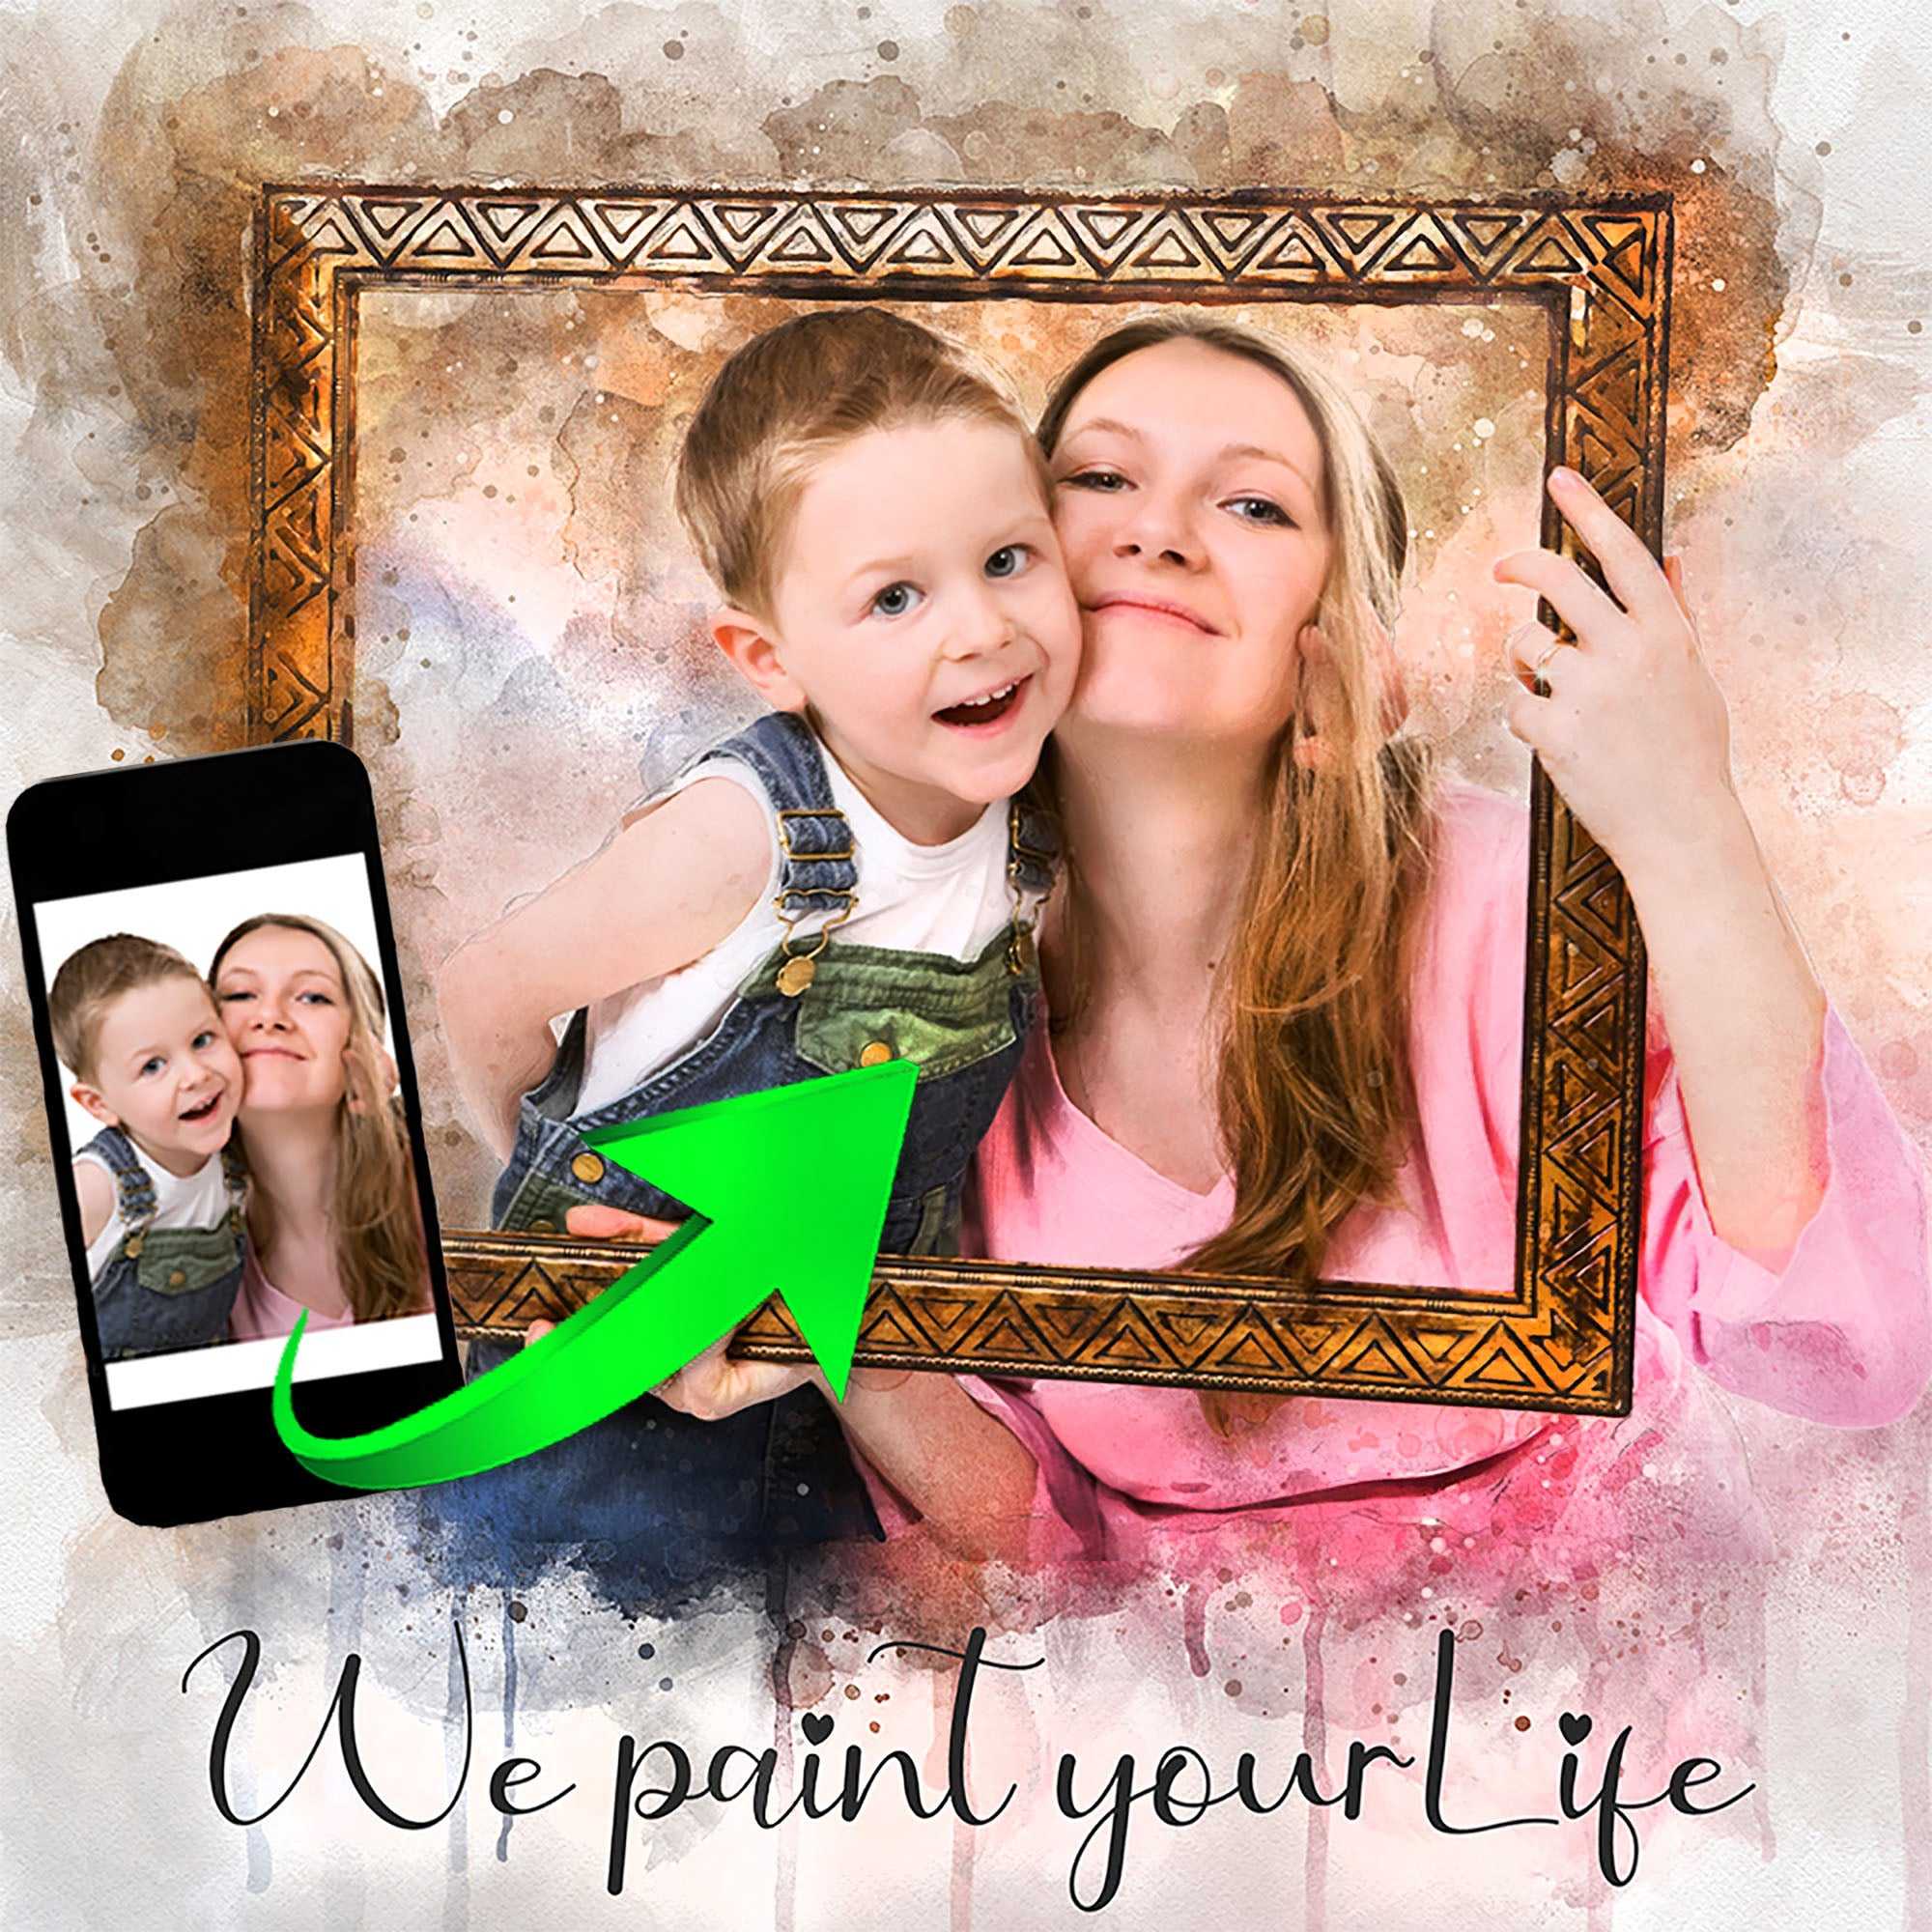 Family Portrait from Individual Photos | Custom Painted Group Portrait | Large Family Paintings from Photo - FromPicToArt